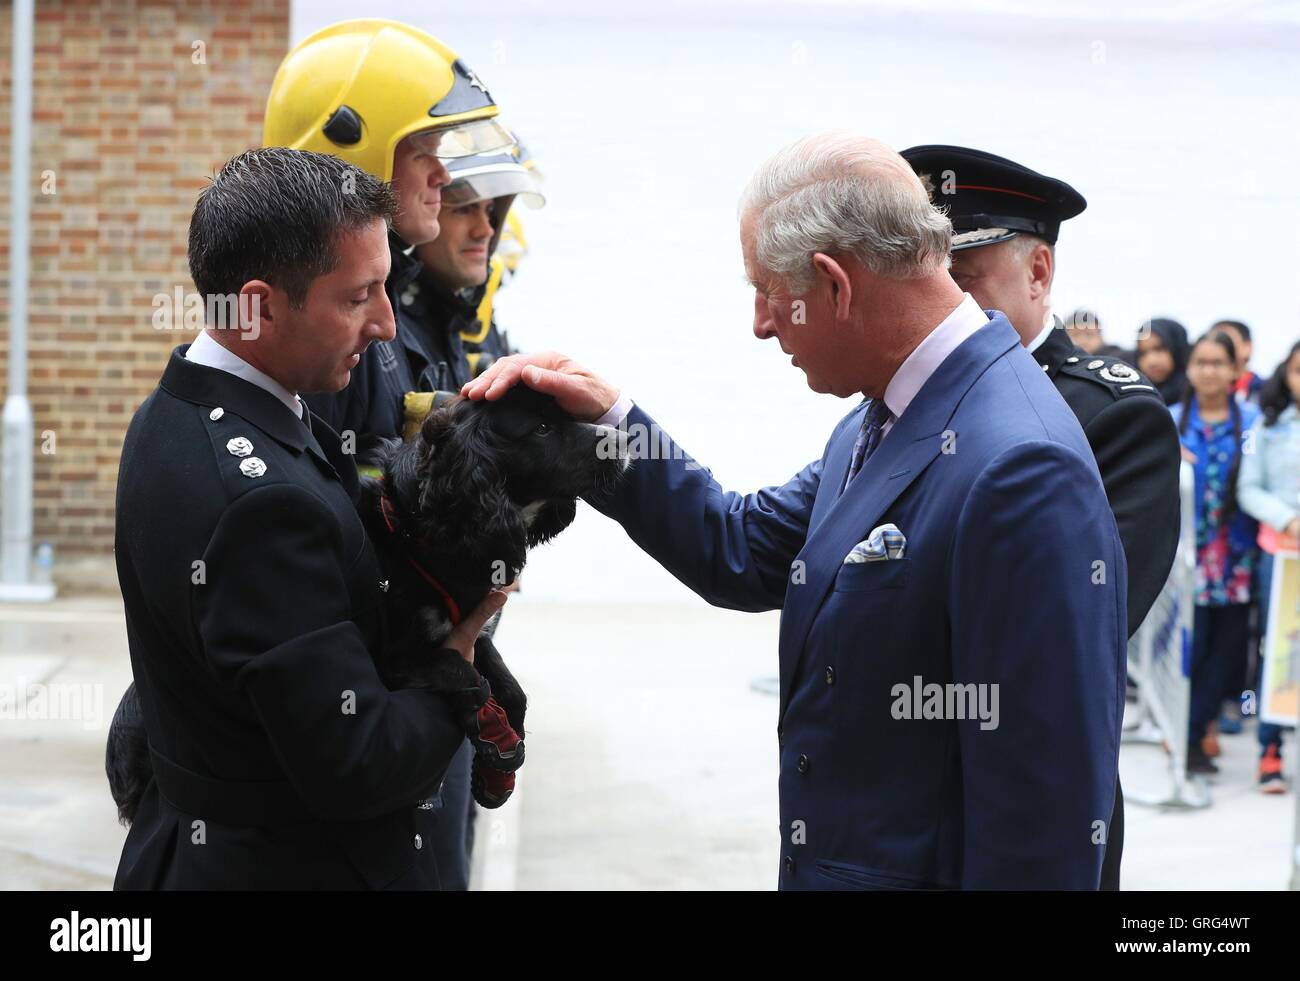 The Prince of Wales Fire Inspector Paul Osborne with fire investigation dog Sherlock during his visit to Shadwell Fire Station where he officially reopened the rebuilt fire station in celebration of the London Fire Brigade's 150th anniversary year. Stock Photo